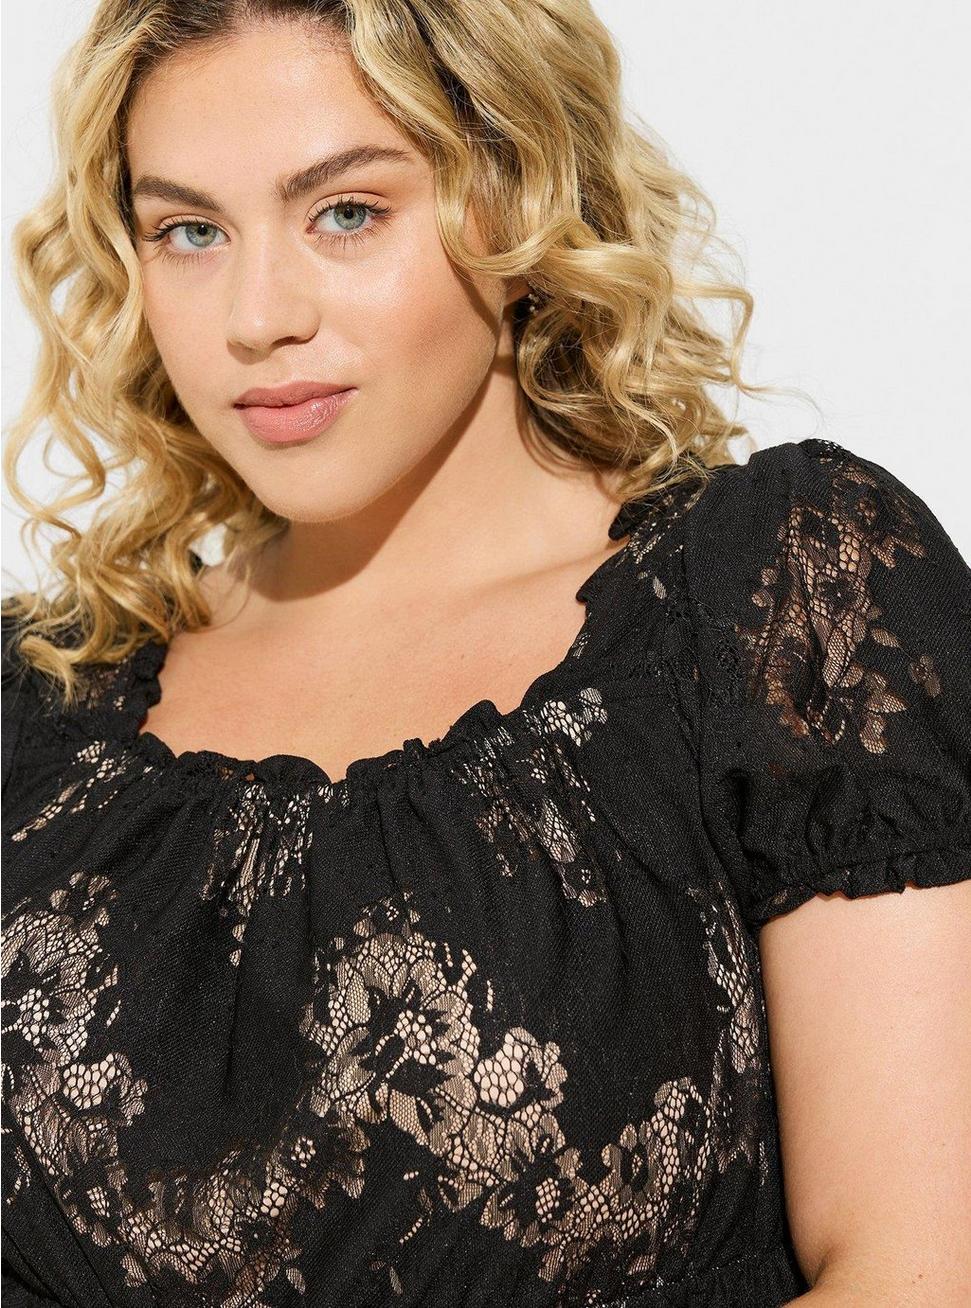 Plus Size Babydoll Lace Tiered Short Sleeve Top, DEEP BLACK, alternate